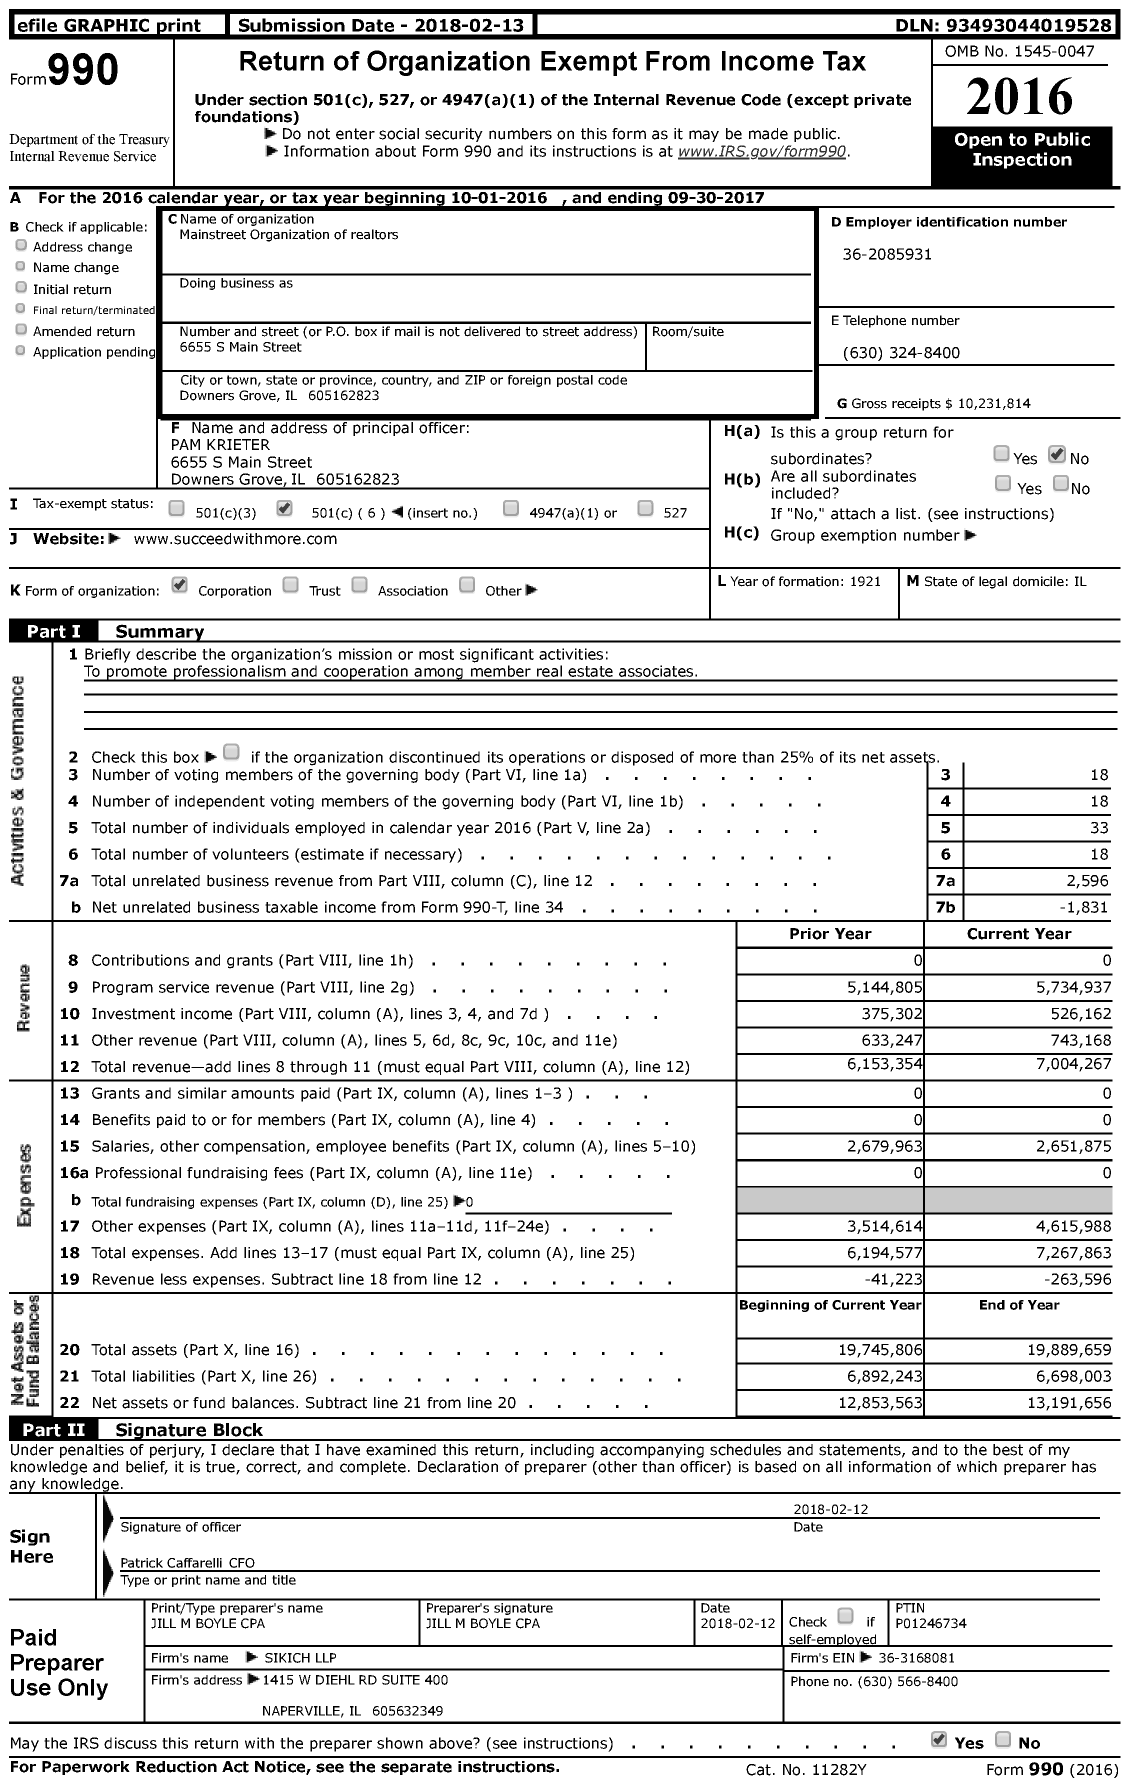 Image of first page of 2016 Form 990 for Mainstreet Organization of Realtors (MOR)